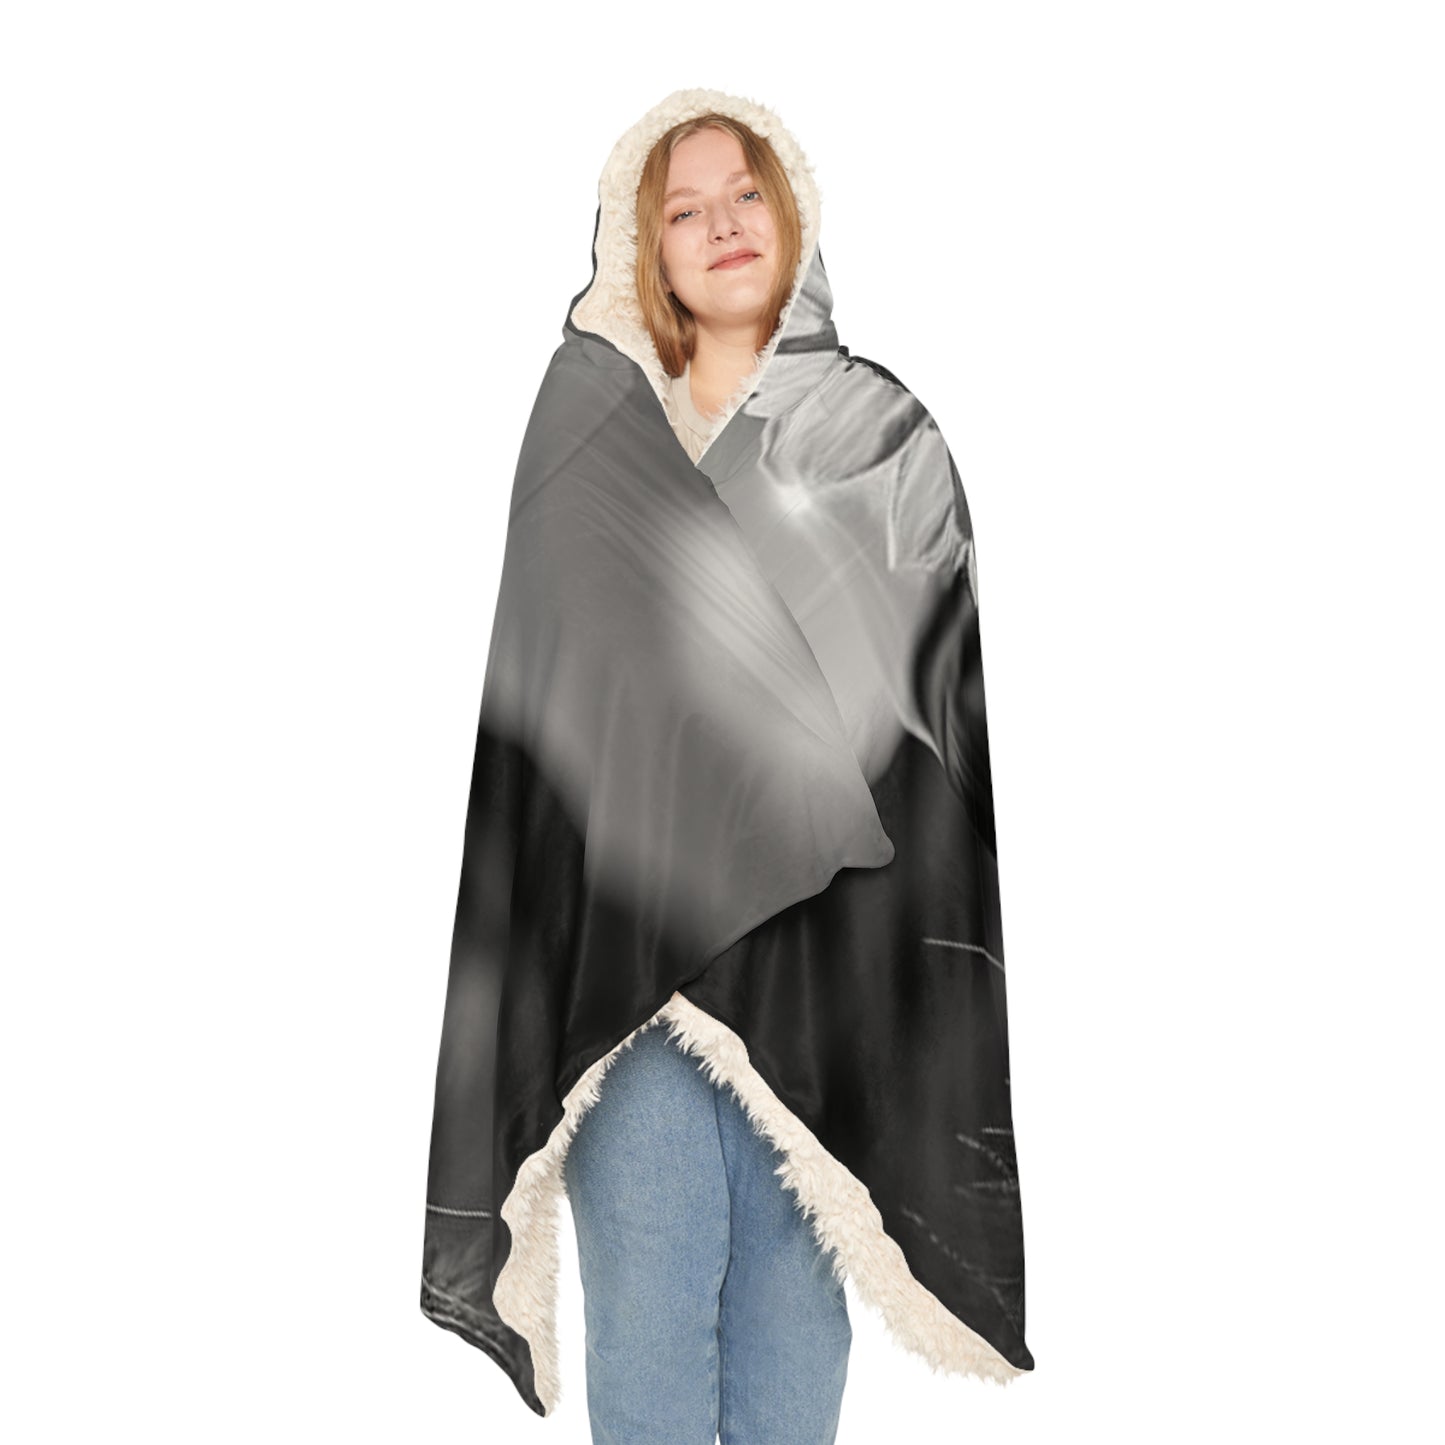 Snuggle Hooded Blanket Yellw Sunflower in a vase 4